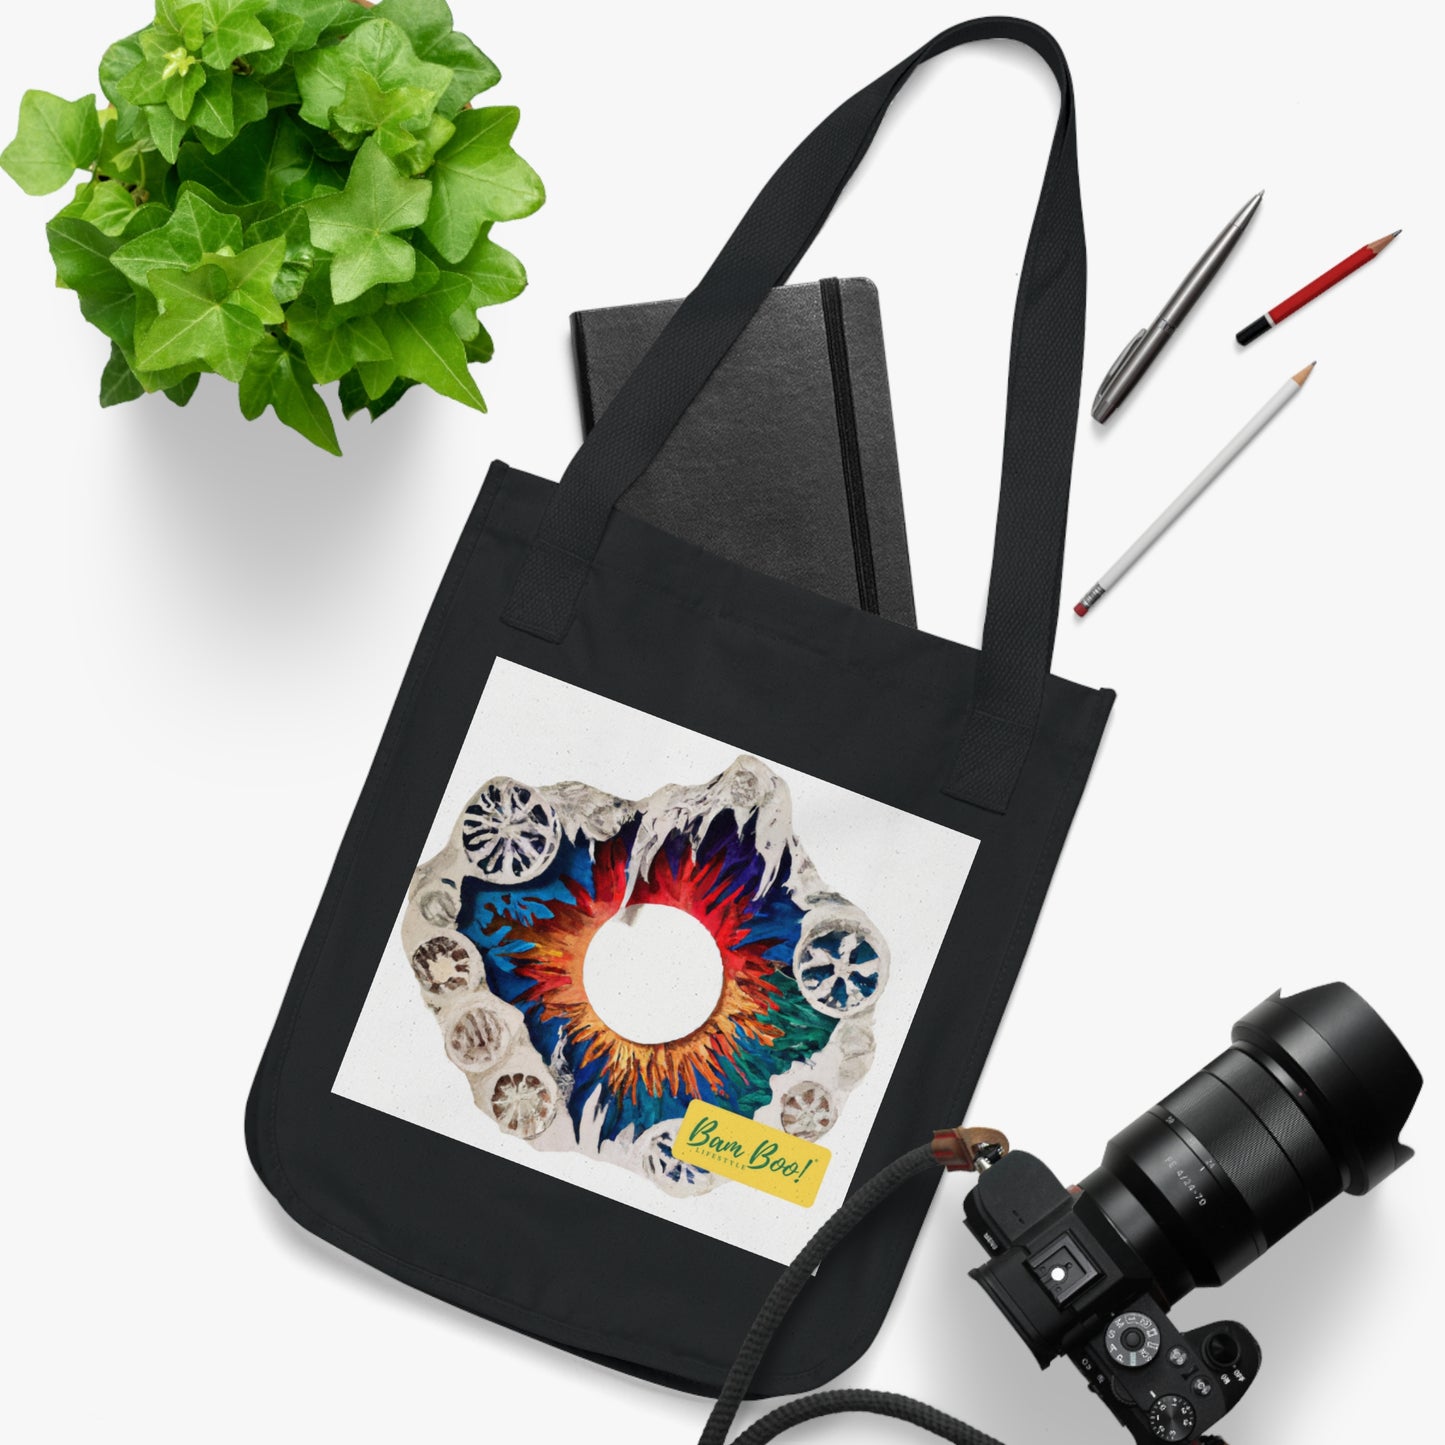 'My Shapes of Life' - Bam Boo! Lifestyle Eco-friendly Tote Bag